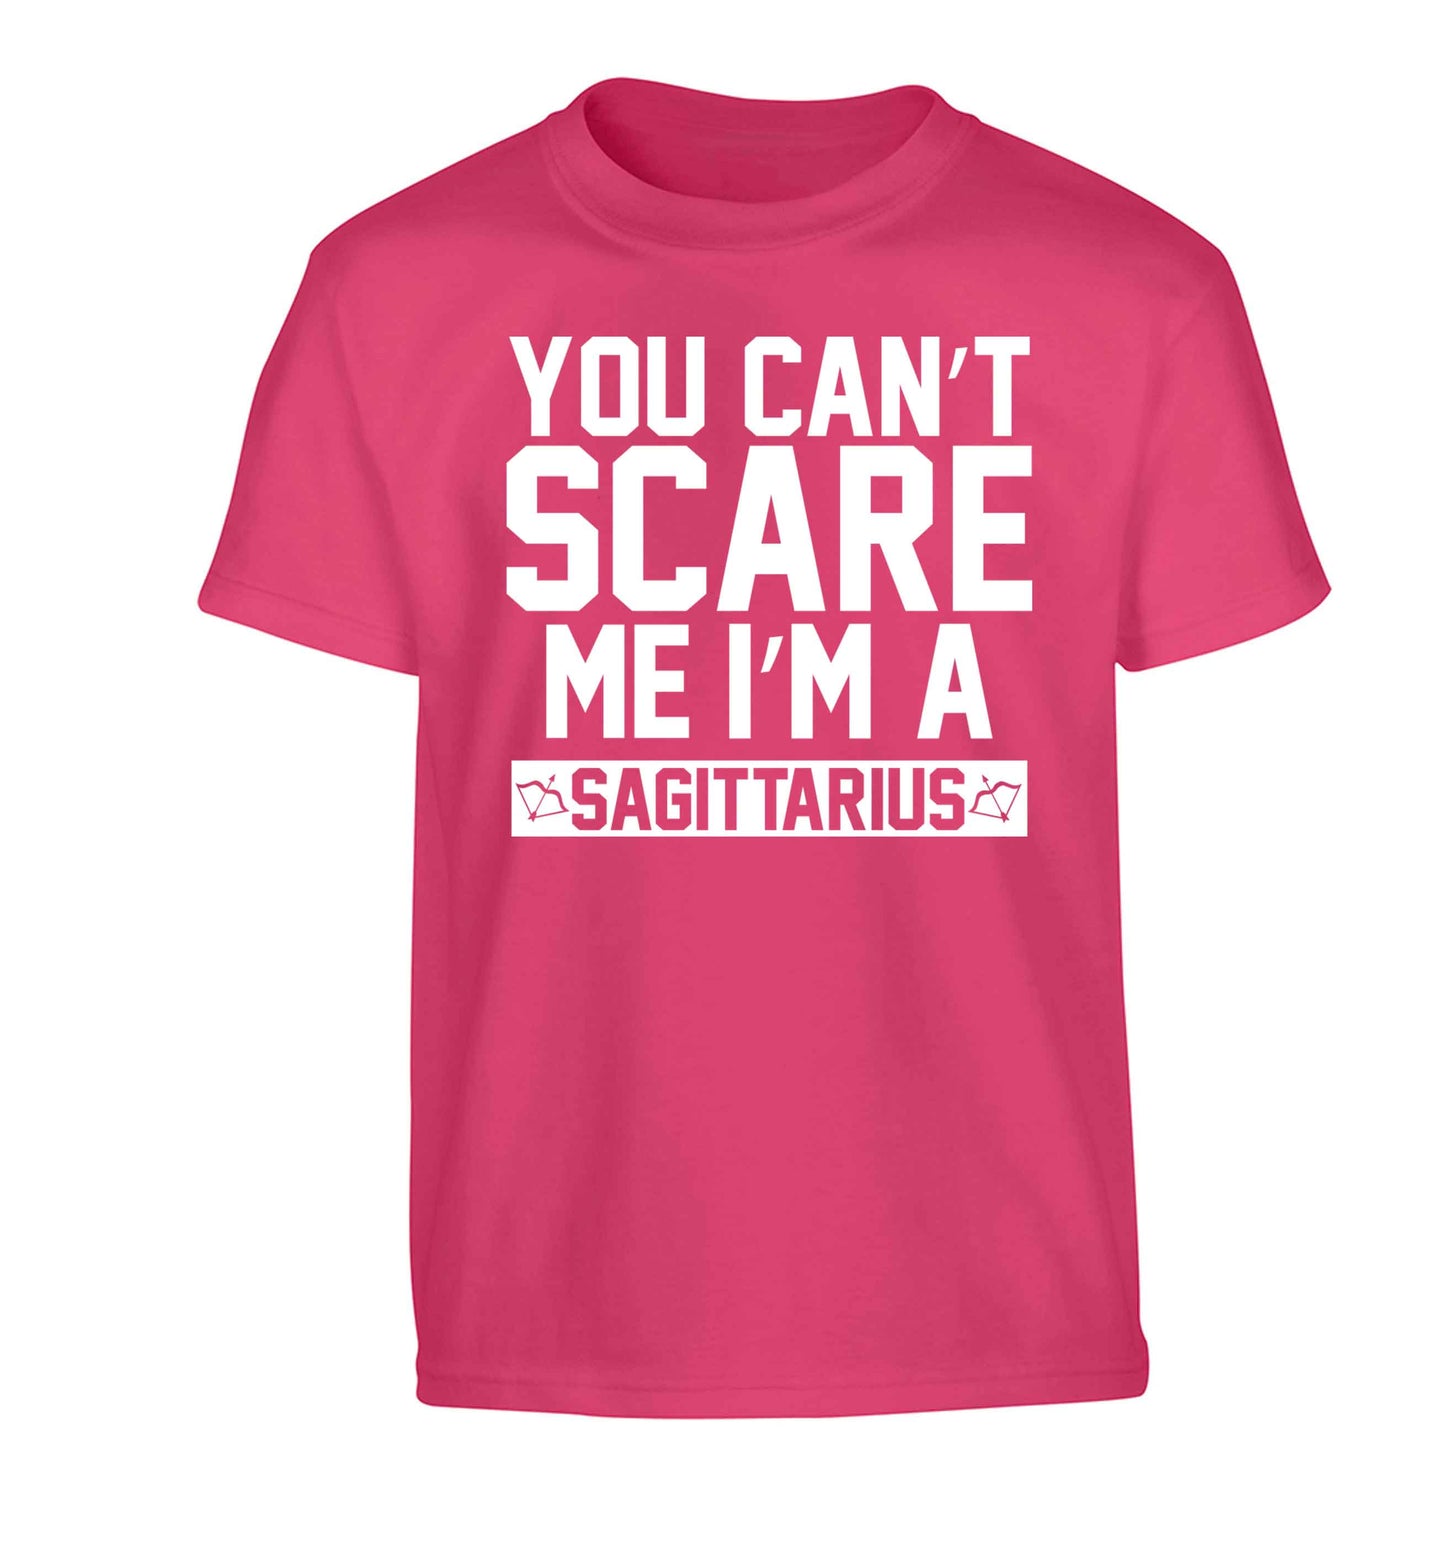 You can't scare me I'm a sagittarius Children's pink Tshirt 12-13 Years